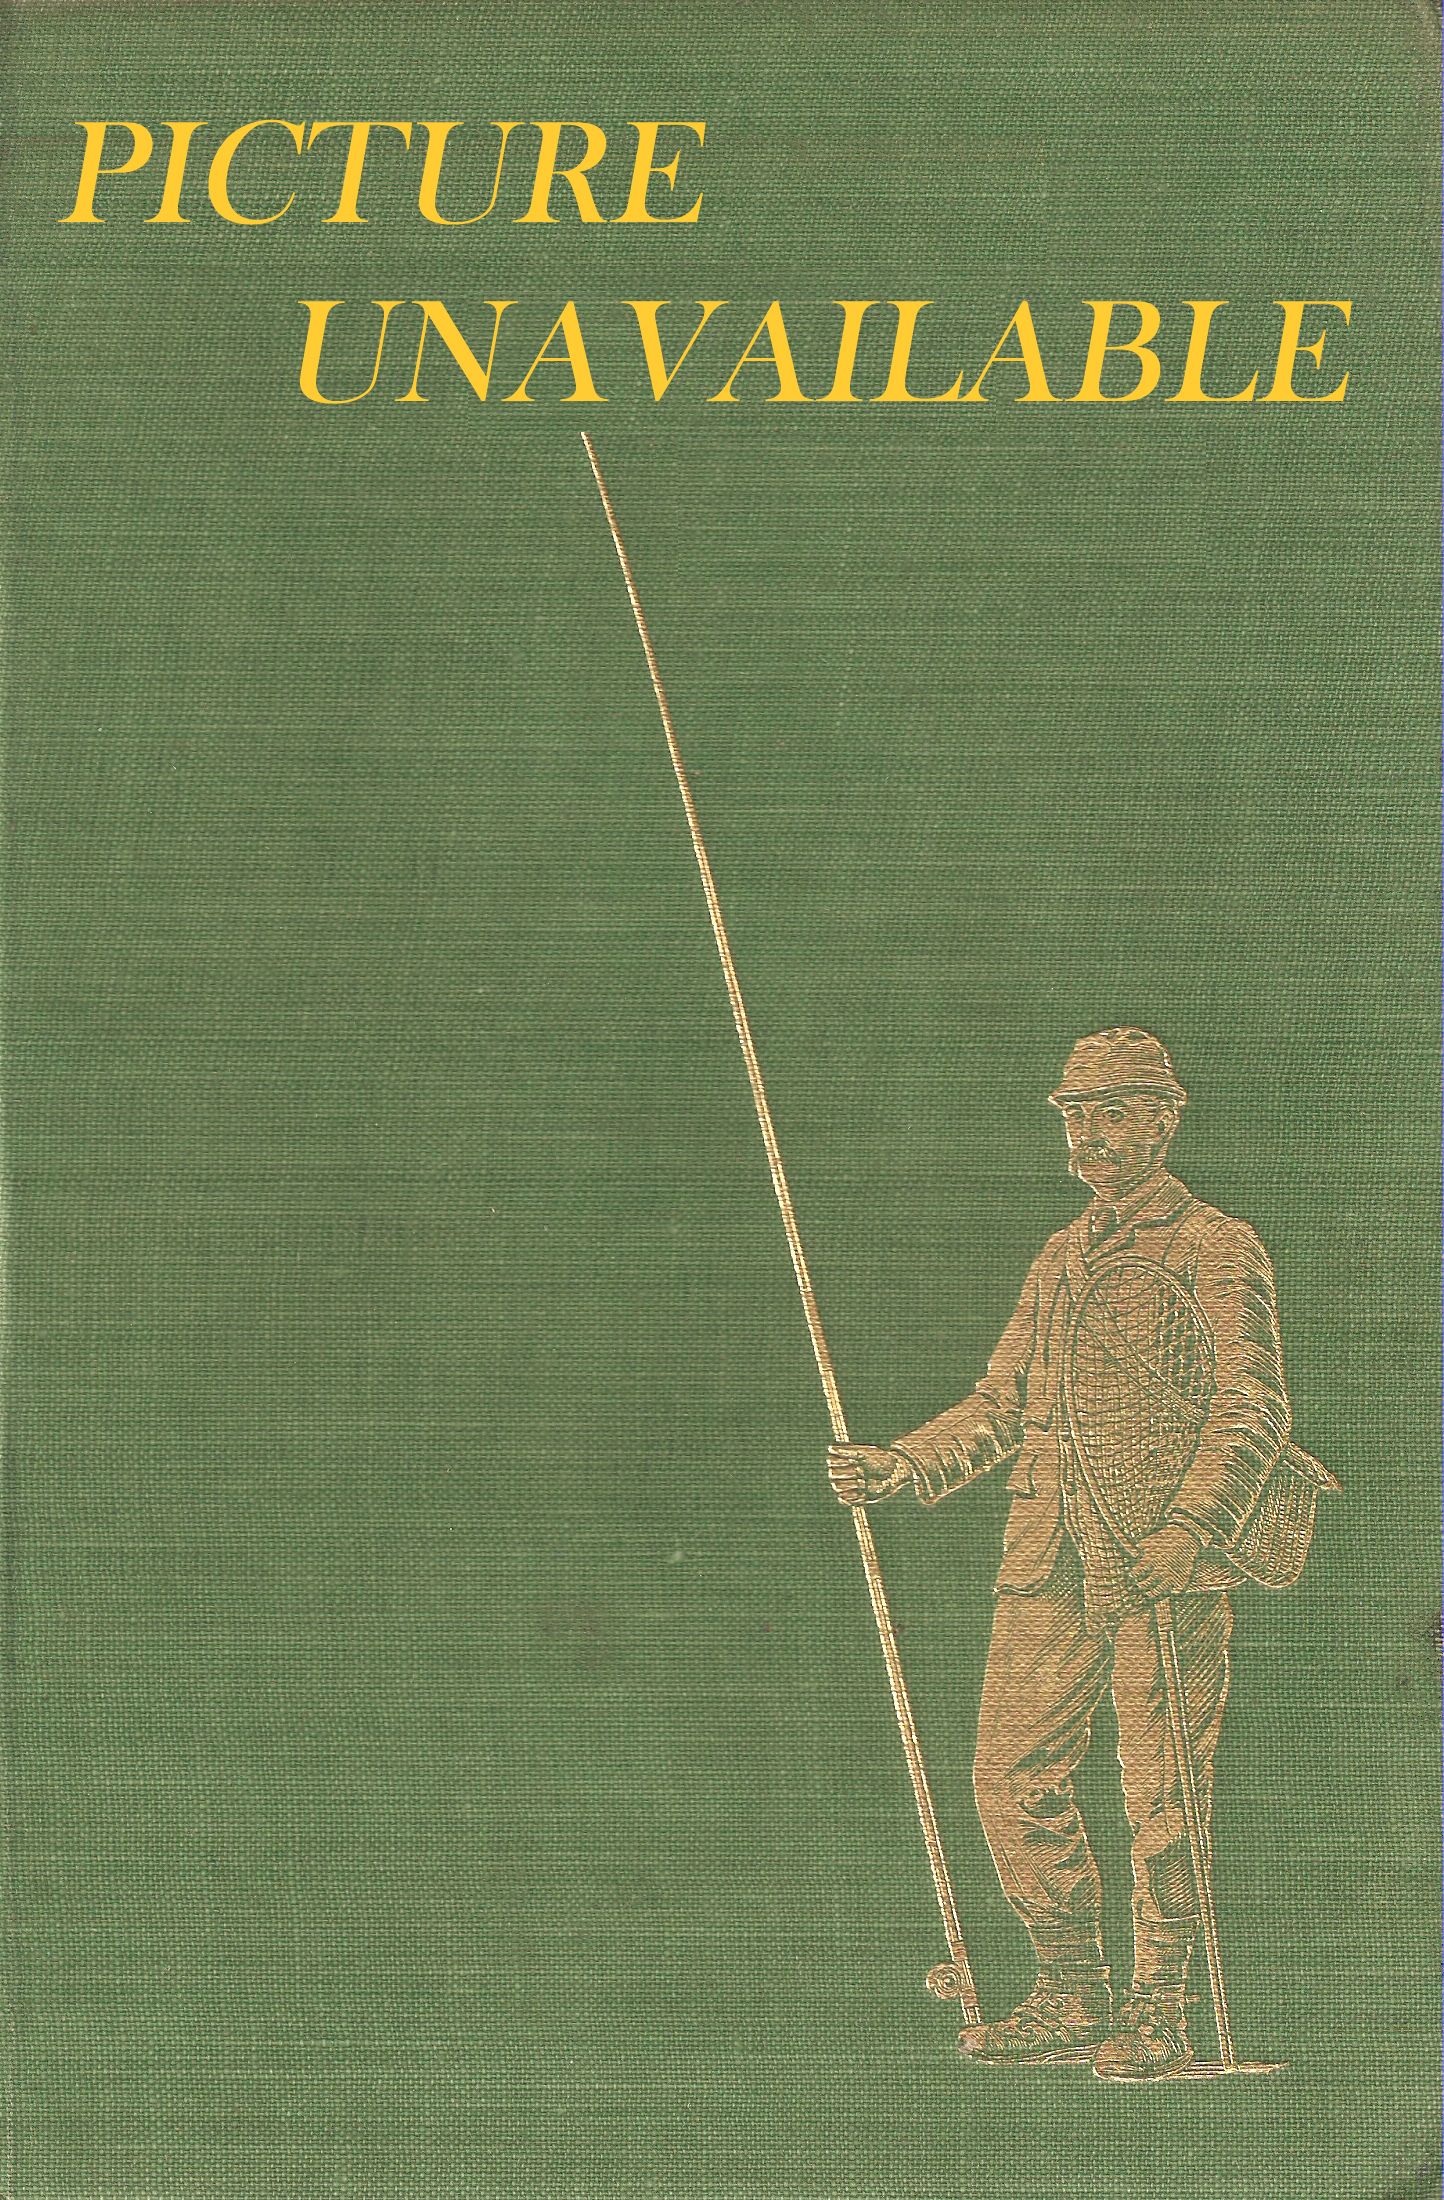 FRANK SAWYER: MAN OF THE RIVERSIDE. By Frank Sawyer and Sidney Vines.  Illustrations by George Woodford.